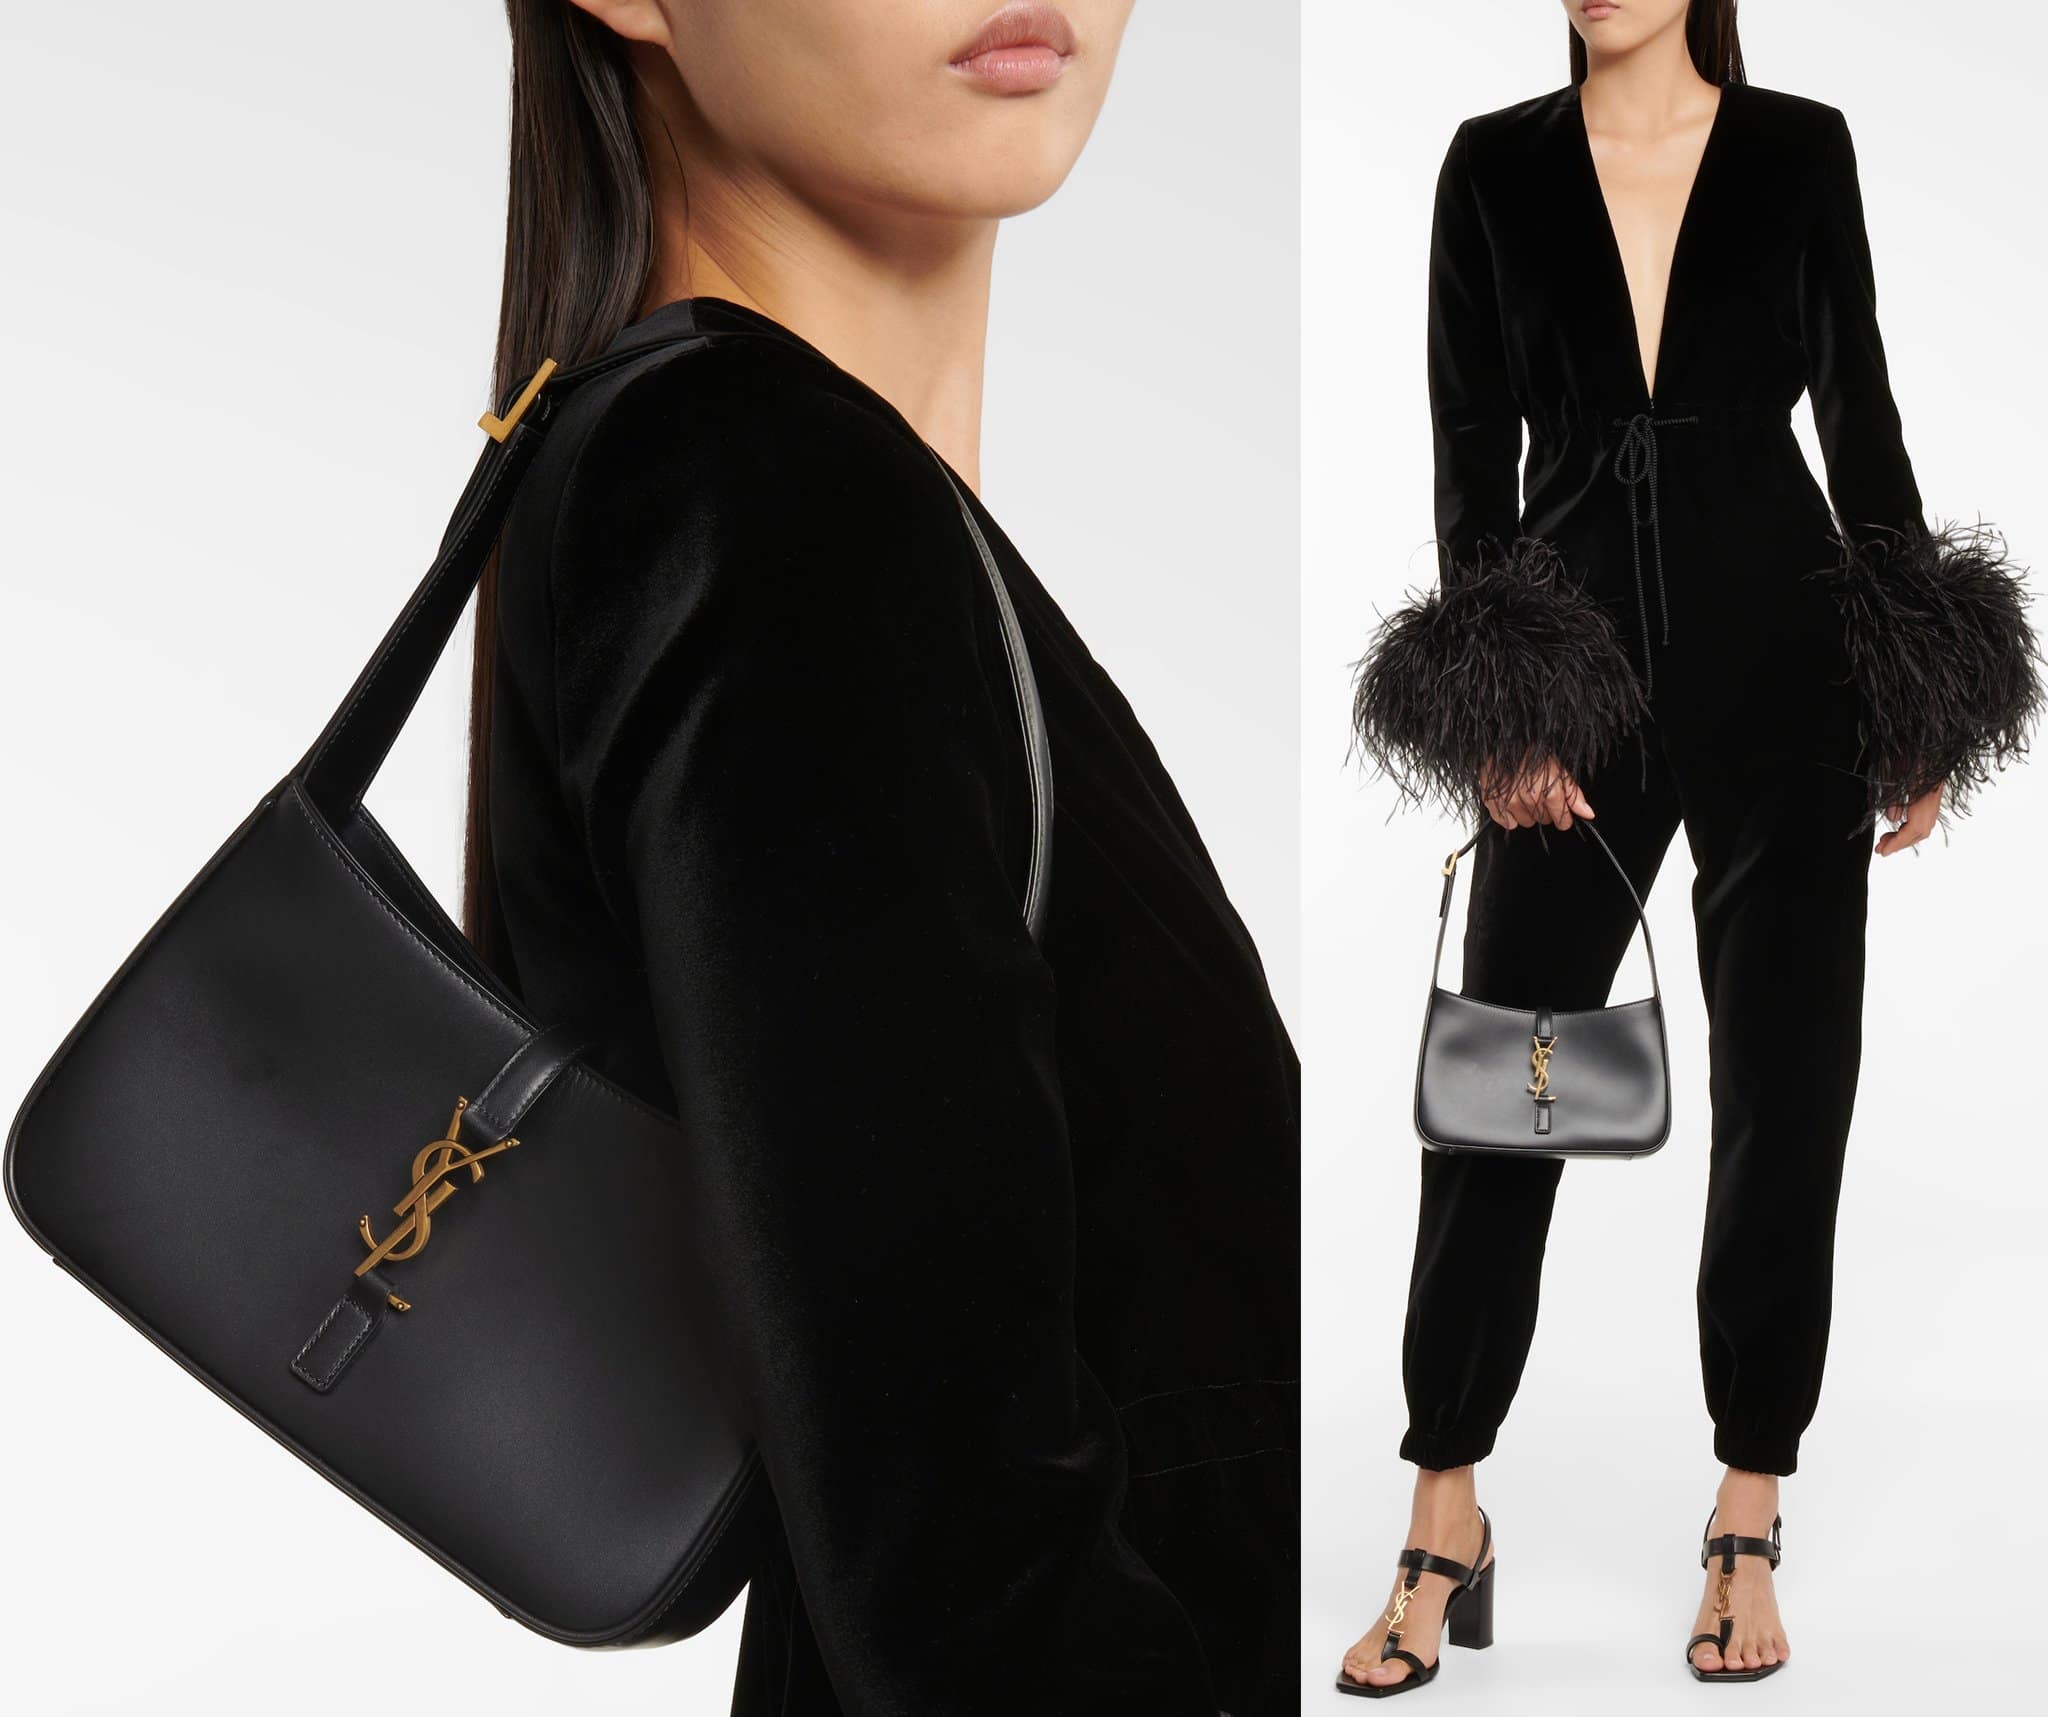 Saint Laurent offers the Le 5 à 7 bag for all your desk-to-dinner and other social activities